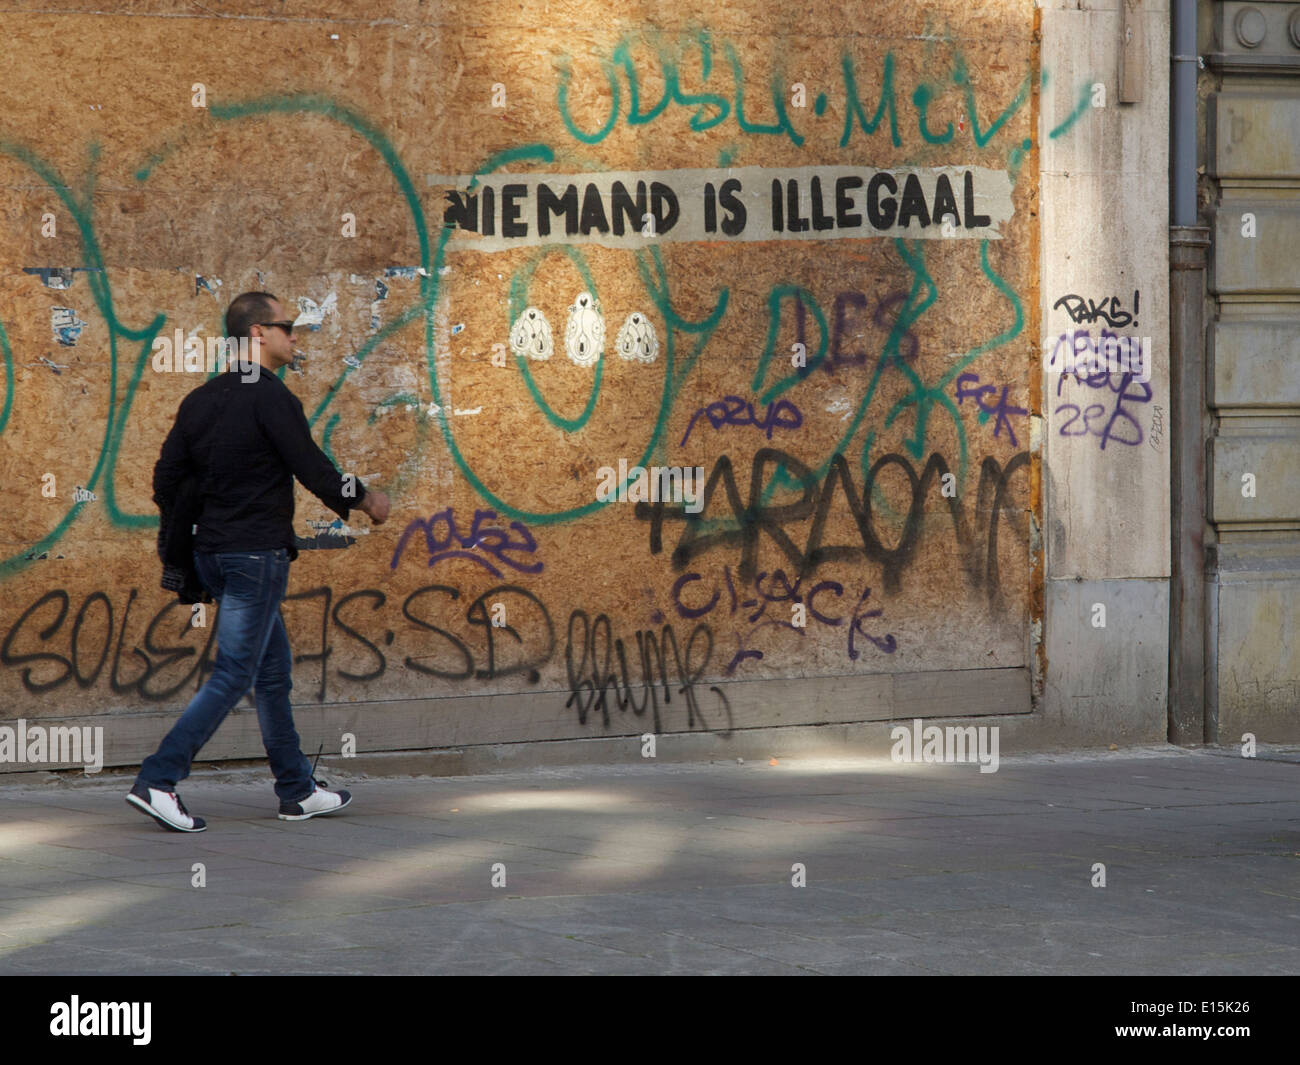 Man walking in a street with graffiti saying nobody is illegal in Dutch language, Brussels, Belgium Stock Photo